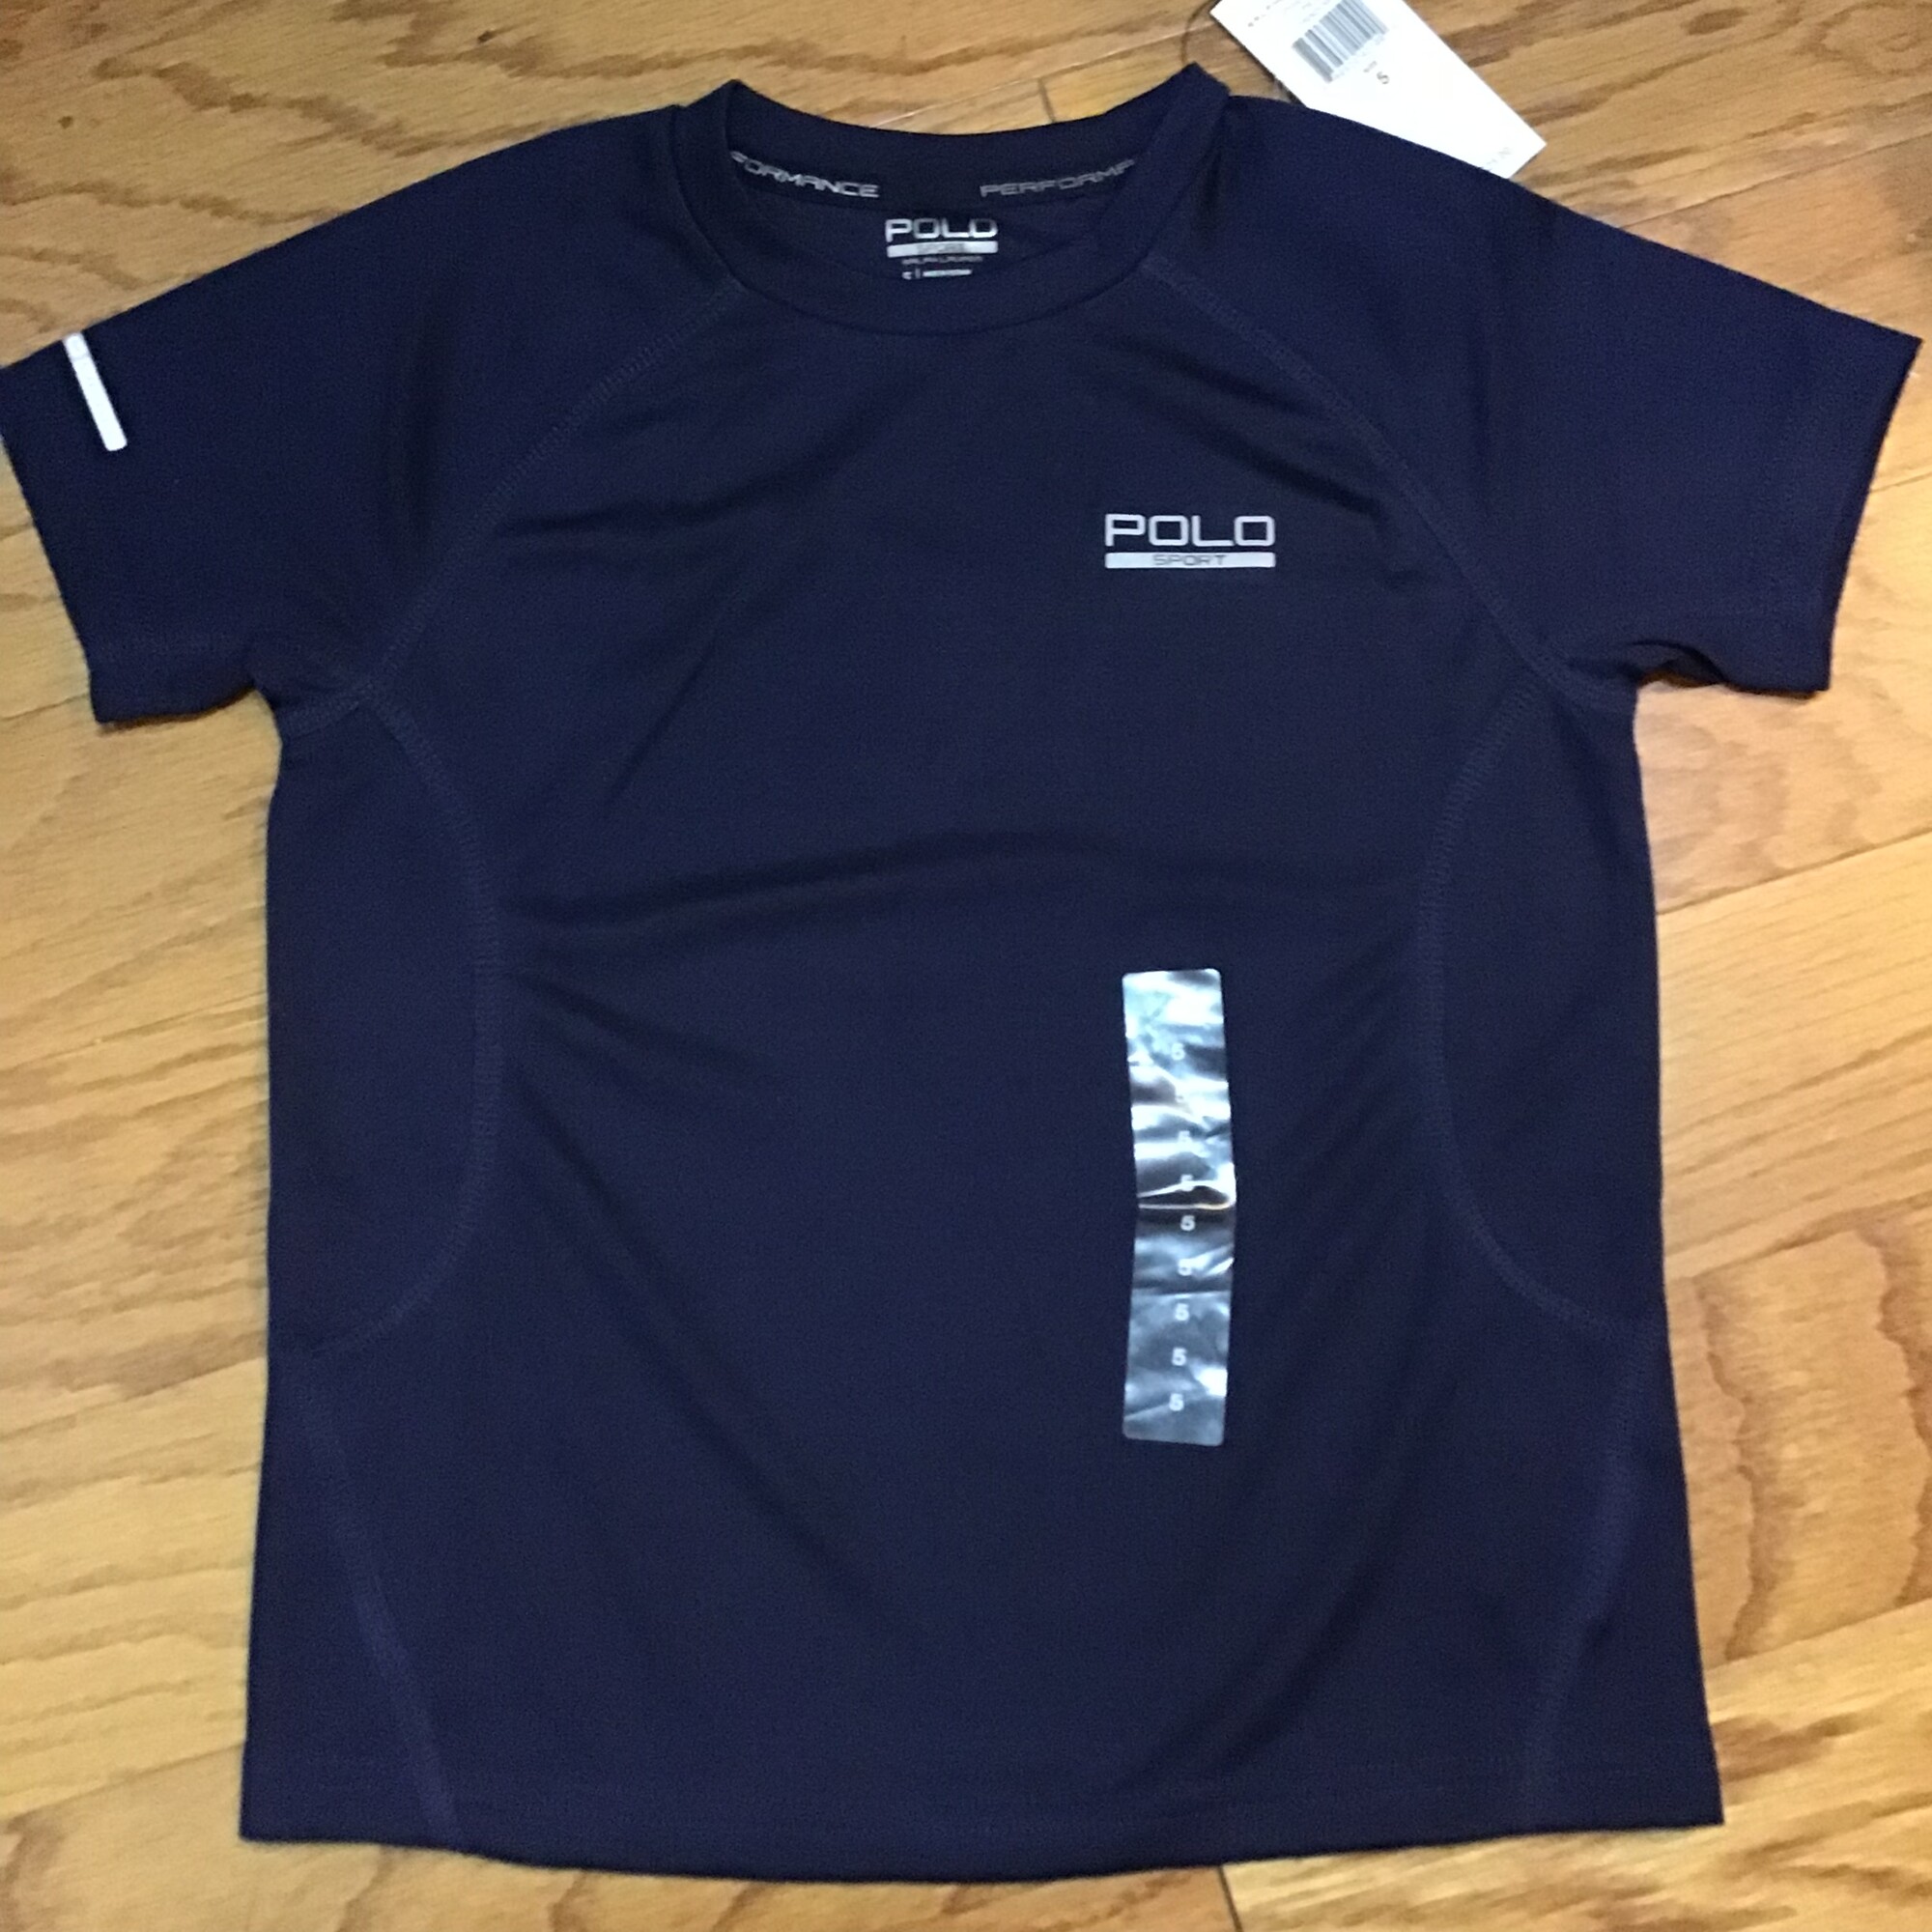 Polo RL Shirt NEW, Navy, Size: 5

brand new with tag

ALL ONLINE SALES ARE FINAL.
NO RETURNS
REFUNDS
OR EXCHANGES

PLEASE ALLOW AT LEAST 1 WEEK FOR SHIPMENT. THANK YOU FOR SHOPPING SMALL!